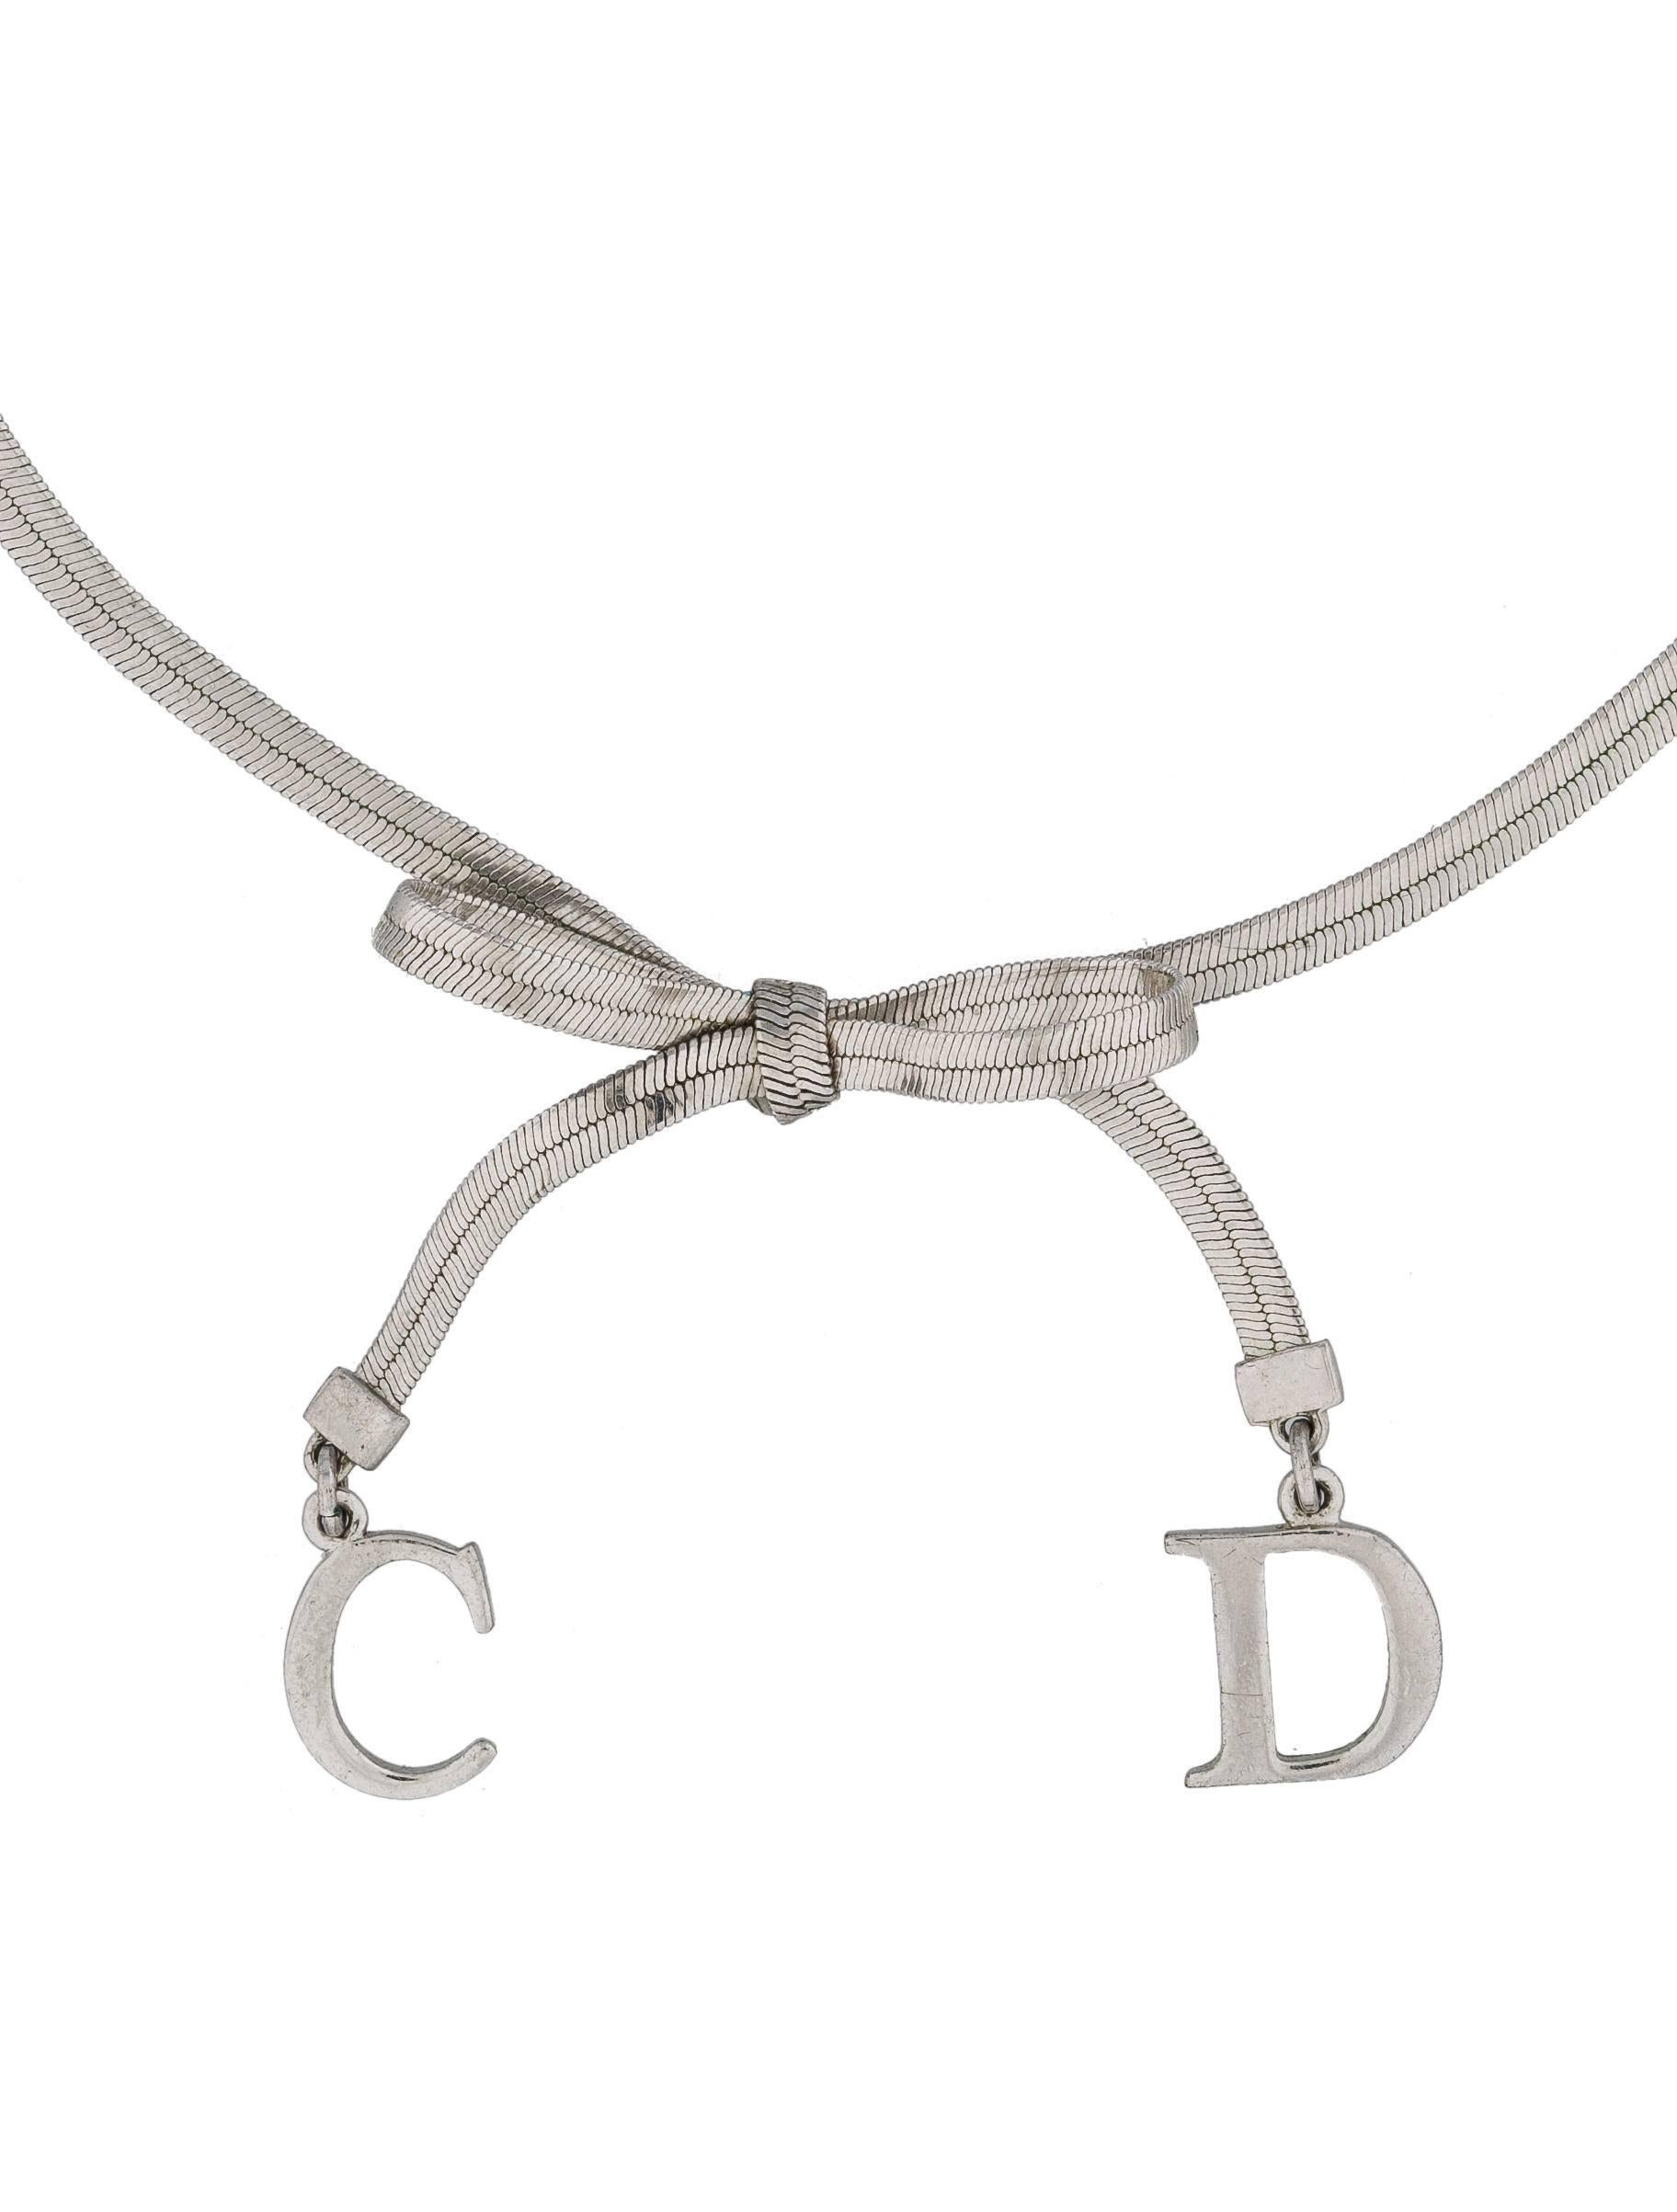 Choker chain necklace by Dior with a bow and CD charms. From John Galliano Era.

Necklace measures 12” to 14”, adjustable, with approximately 1 ½” drop.
Chain is 3 mms wide. Color is silver.